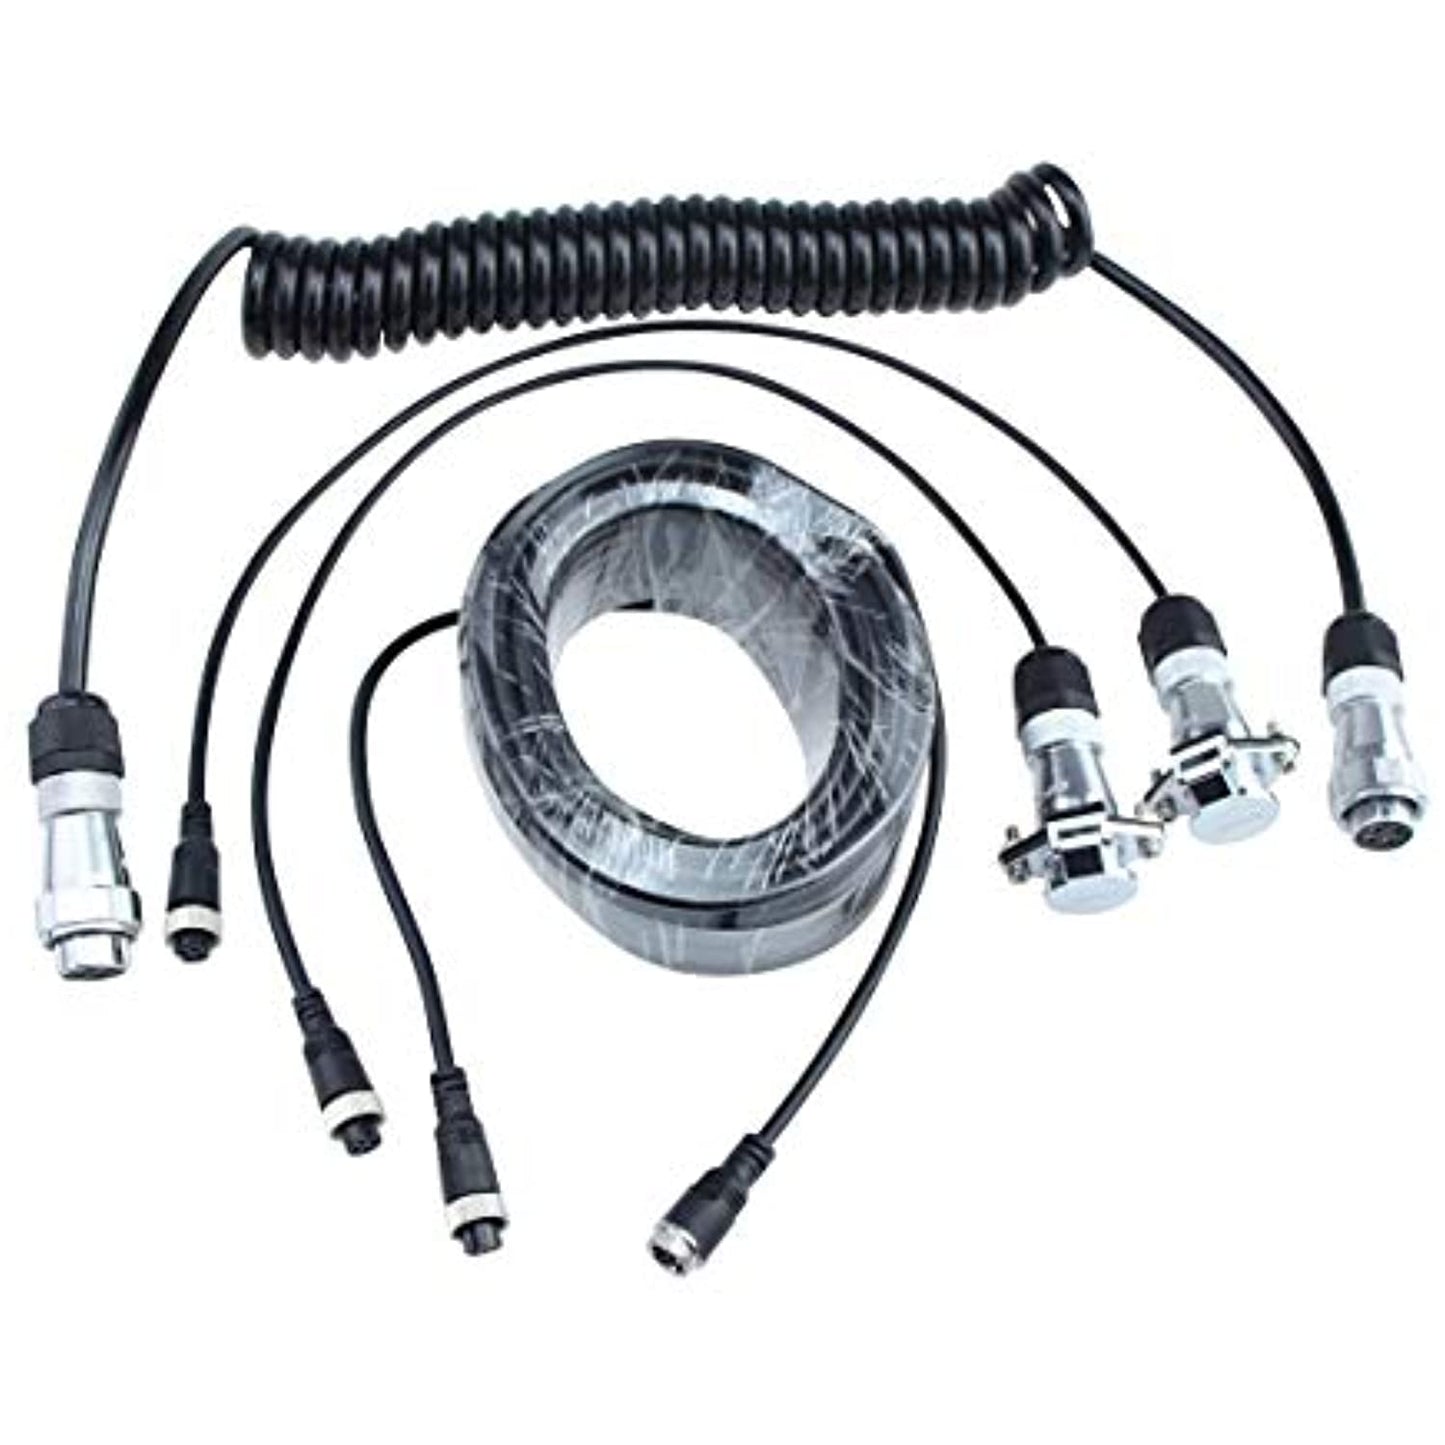 Spiral Trailer Cable